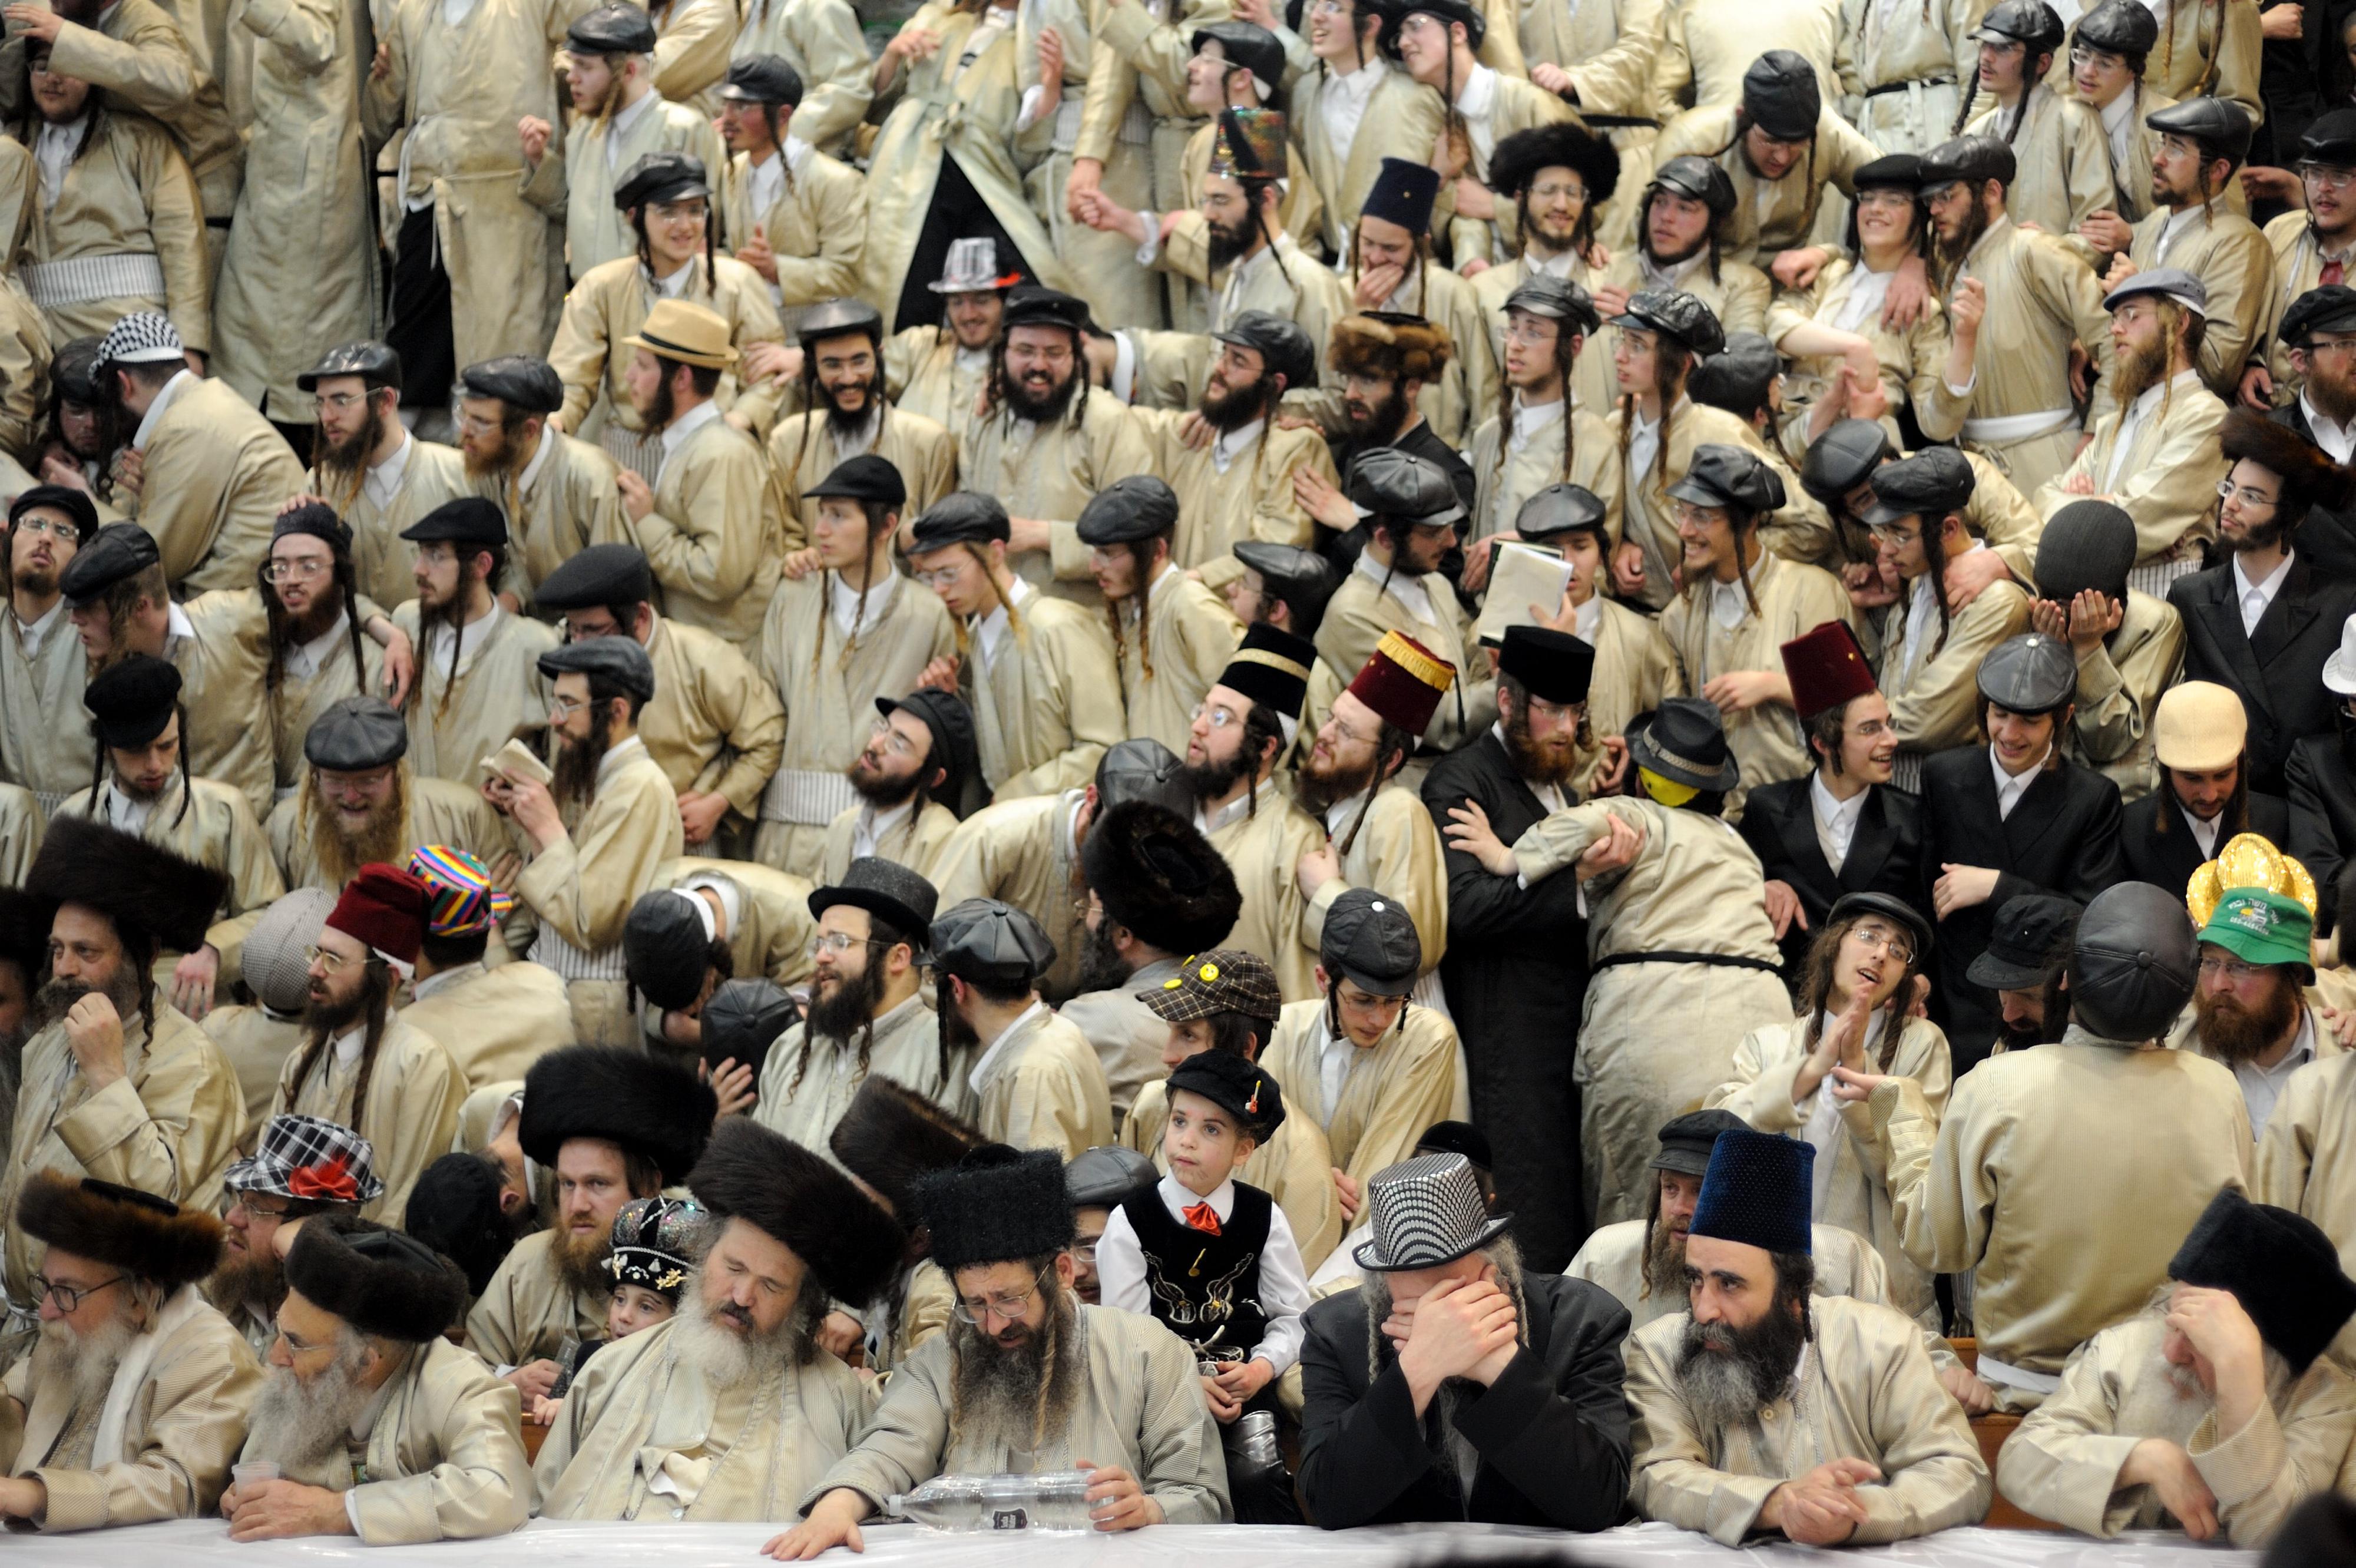 Ultra-Orthodox Jewish men of the Toldot Aharon Sect celebrate the Purim holiday in the ultra-orthodox Mea Shearim neighborhood in Jerusalem on March 17, 2014. The festival of Purim commemorates the rescue of Jews from a genocide in ancient Persia. Foto: Gili Yaari, Israel, Shortlist, Arts & Culture, Professional, 2015 Sony World Photography Awards